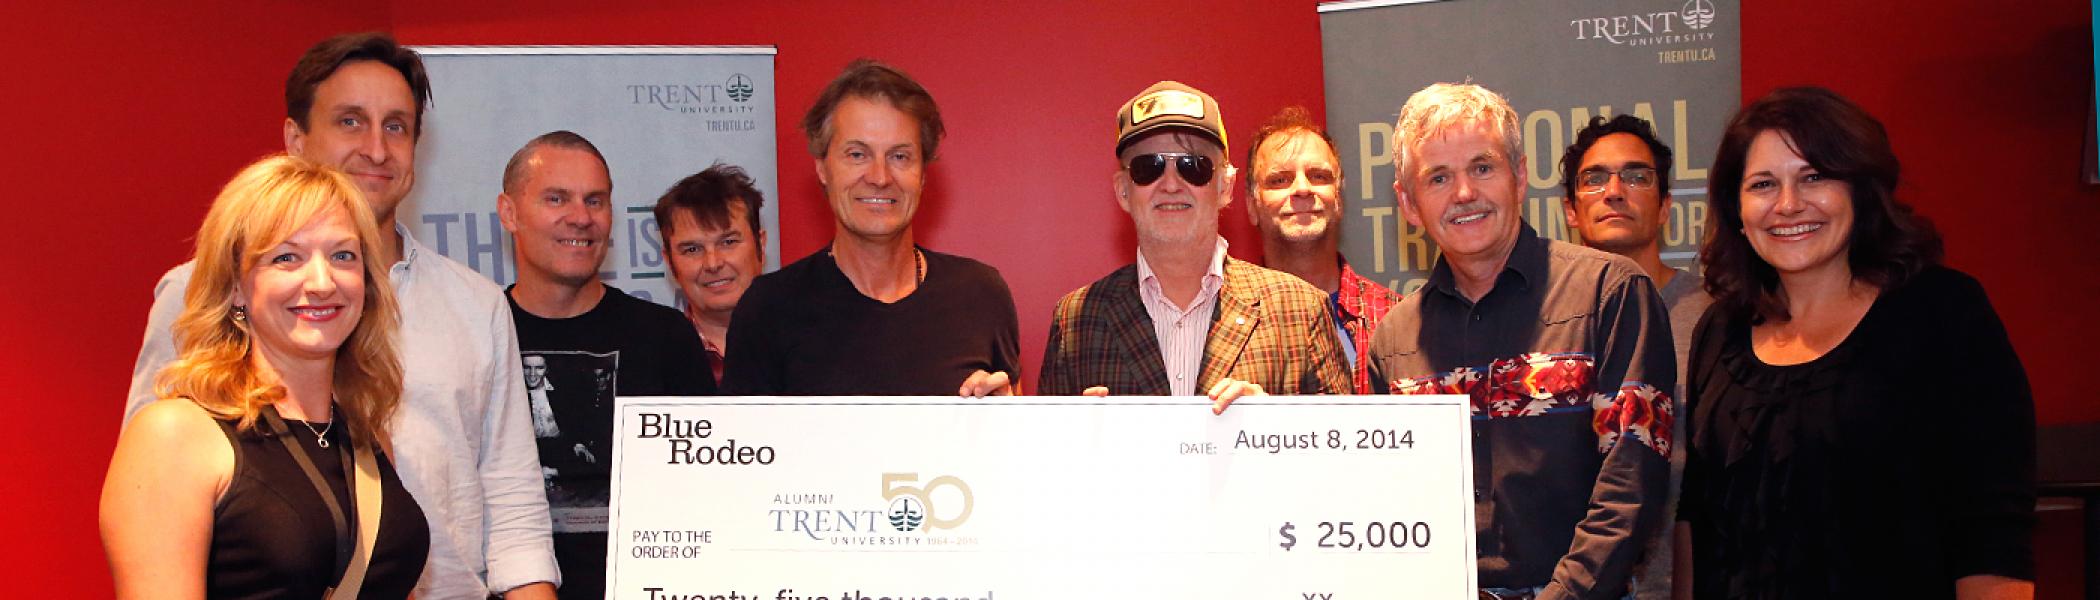 Dr. Leo Groarke, Julie Davis and Lee Hays posing with a large white check for $25,000 with the band Blue Rodeo in front of a red wall